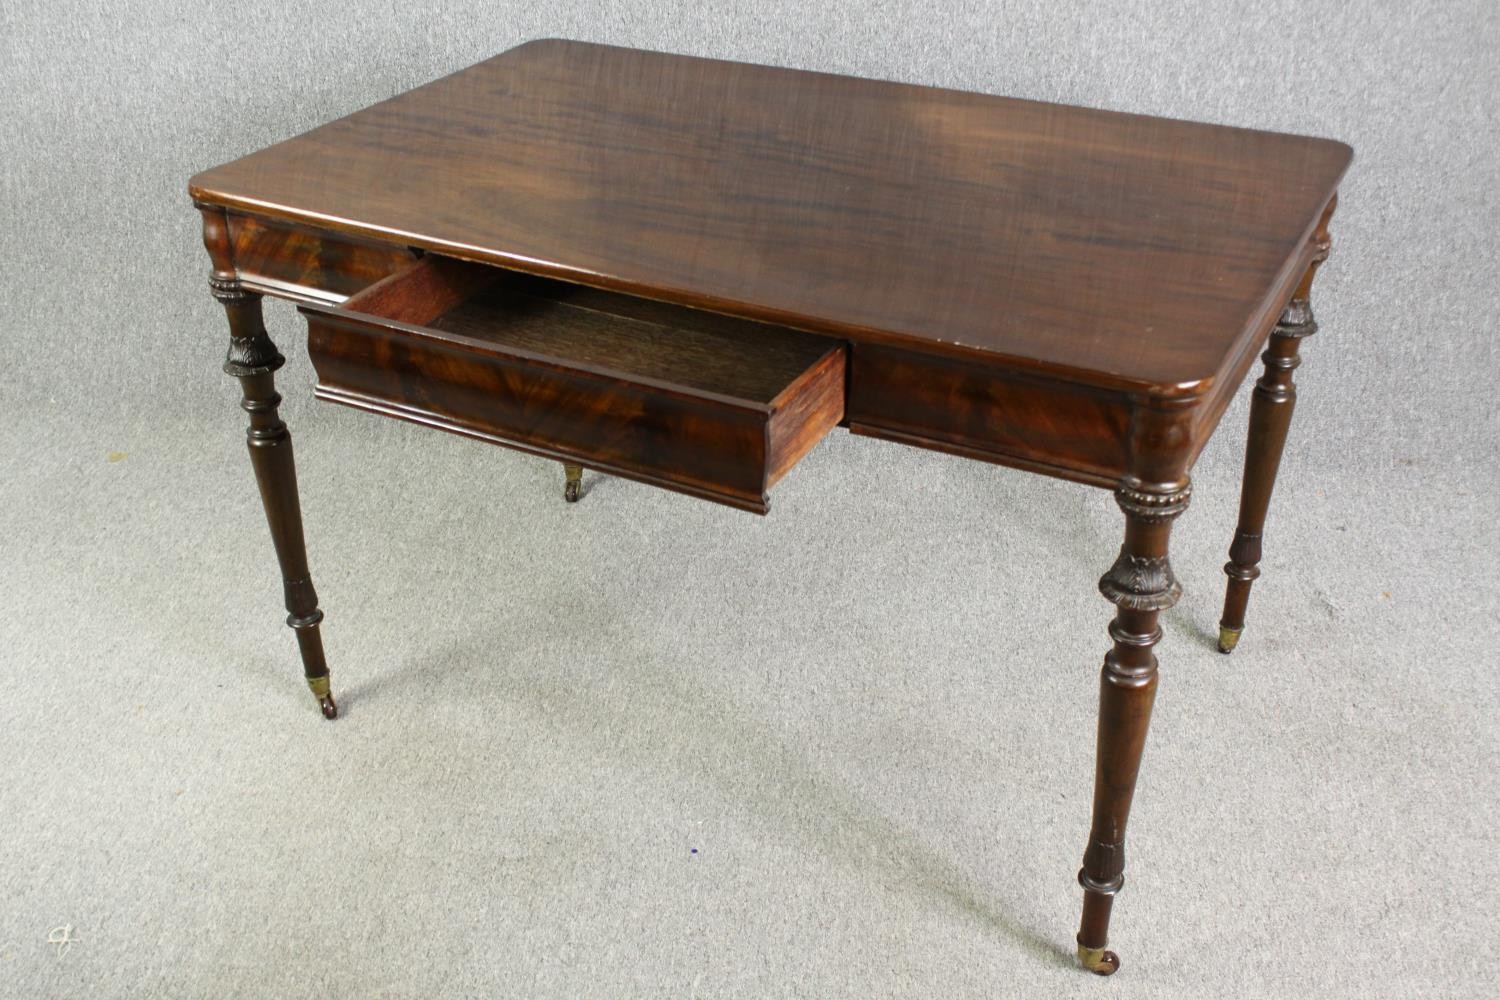 A George IV mahogany writing desk or side table, with H.78 W.124 D.80cm. - Image 4 of 6